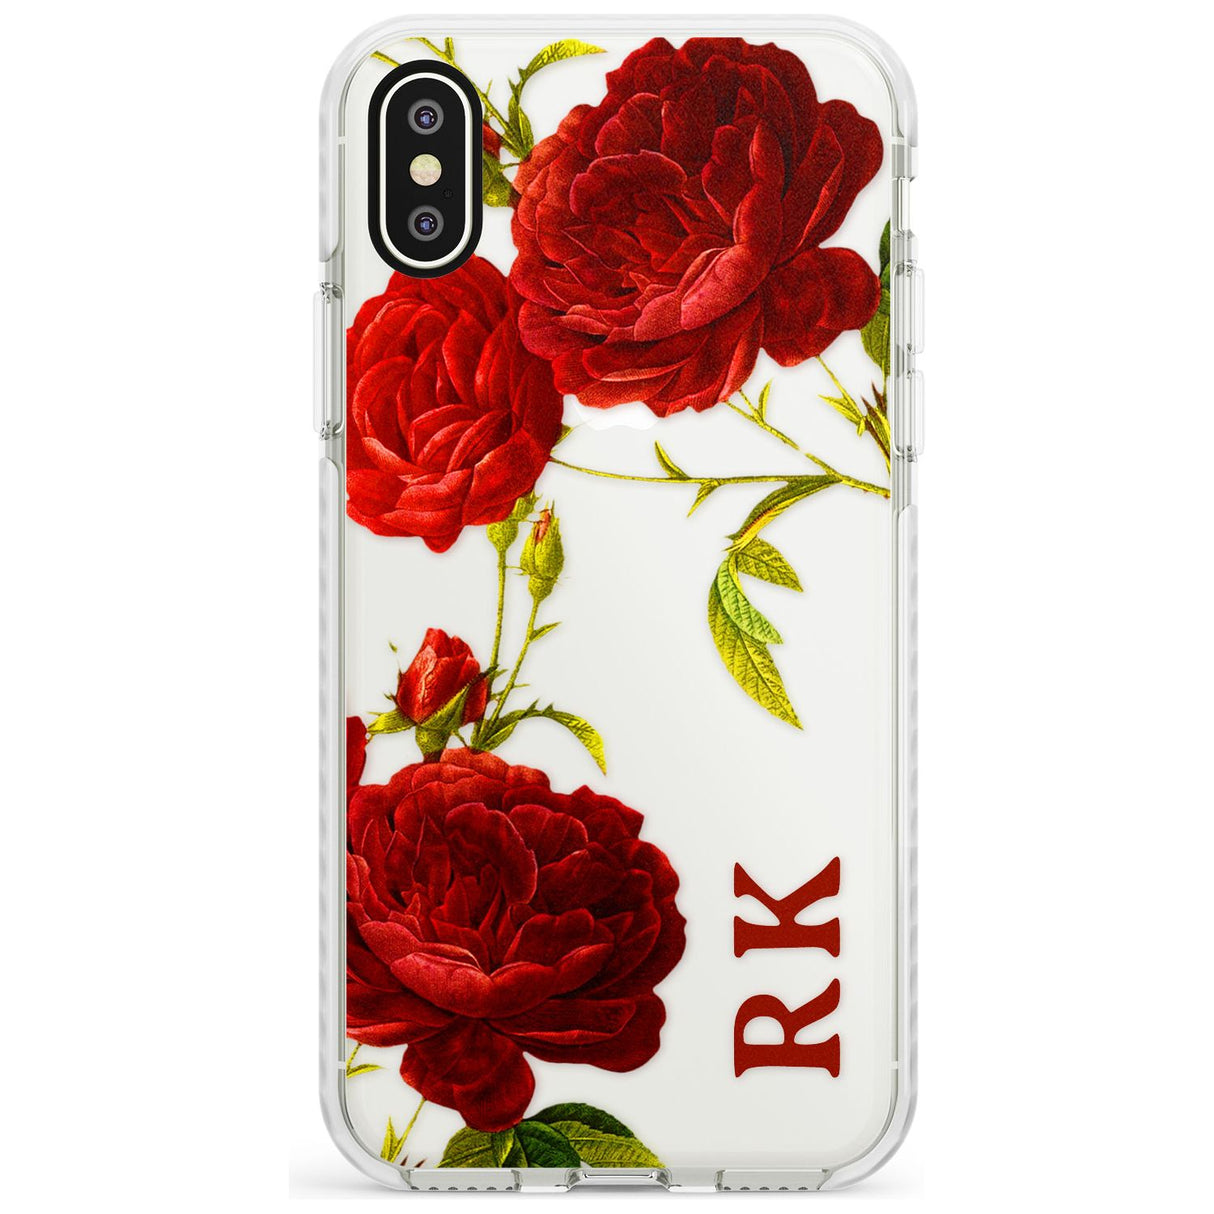 Custom Clear Vintage Floral Red Roses Impact Phone Case for iPhone X XS Max XR